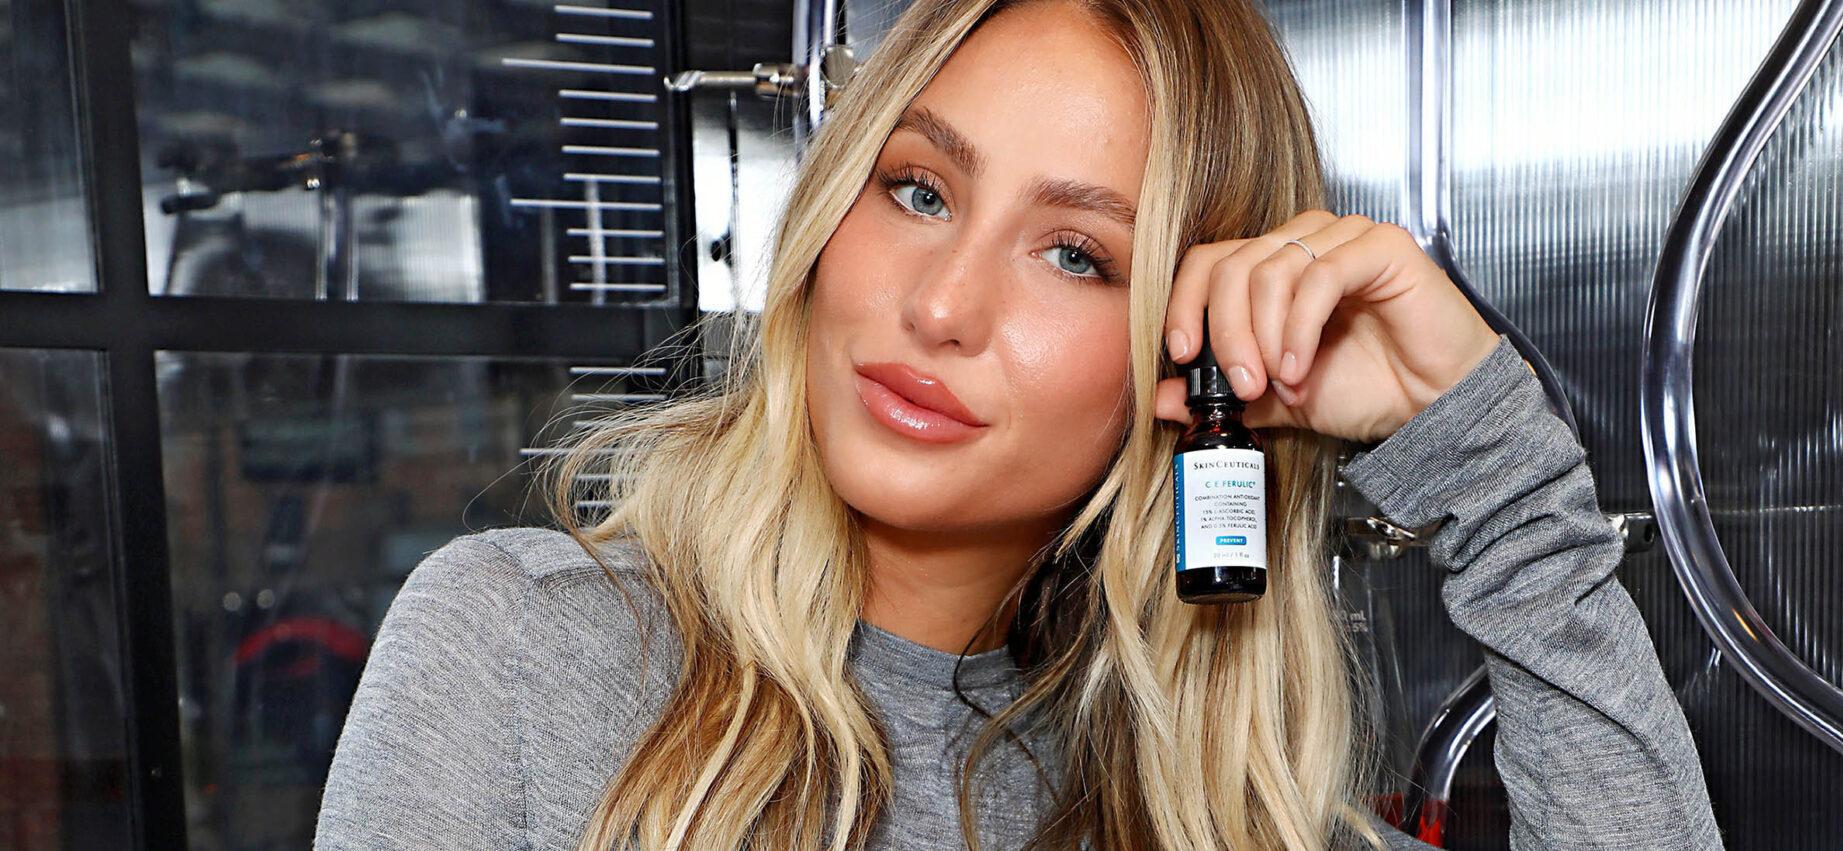 Alix Earle Celebrates the launch of the SkinCeuticals Treatment Tour during NYFW